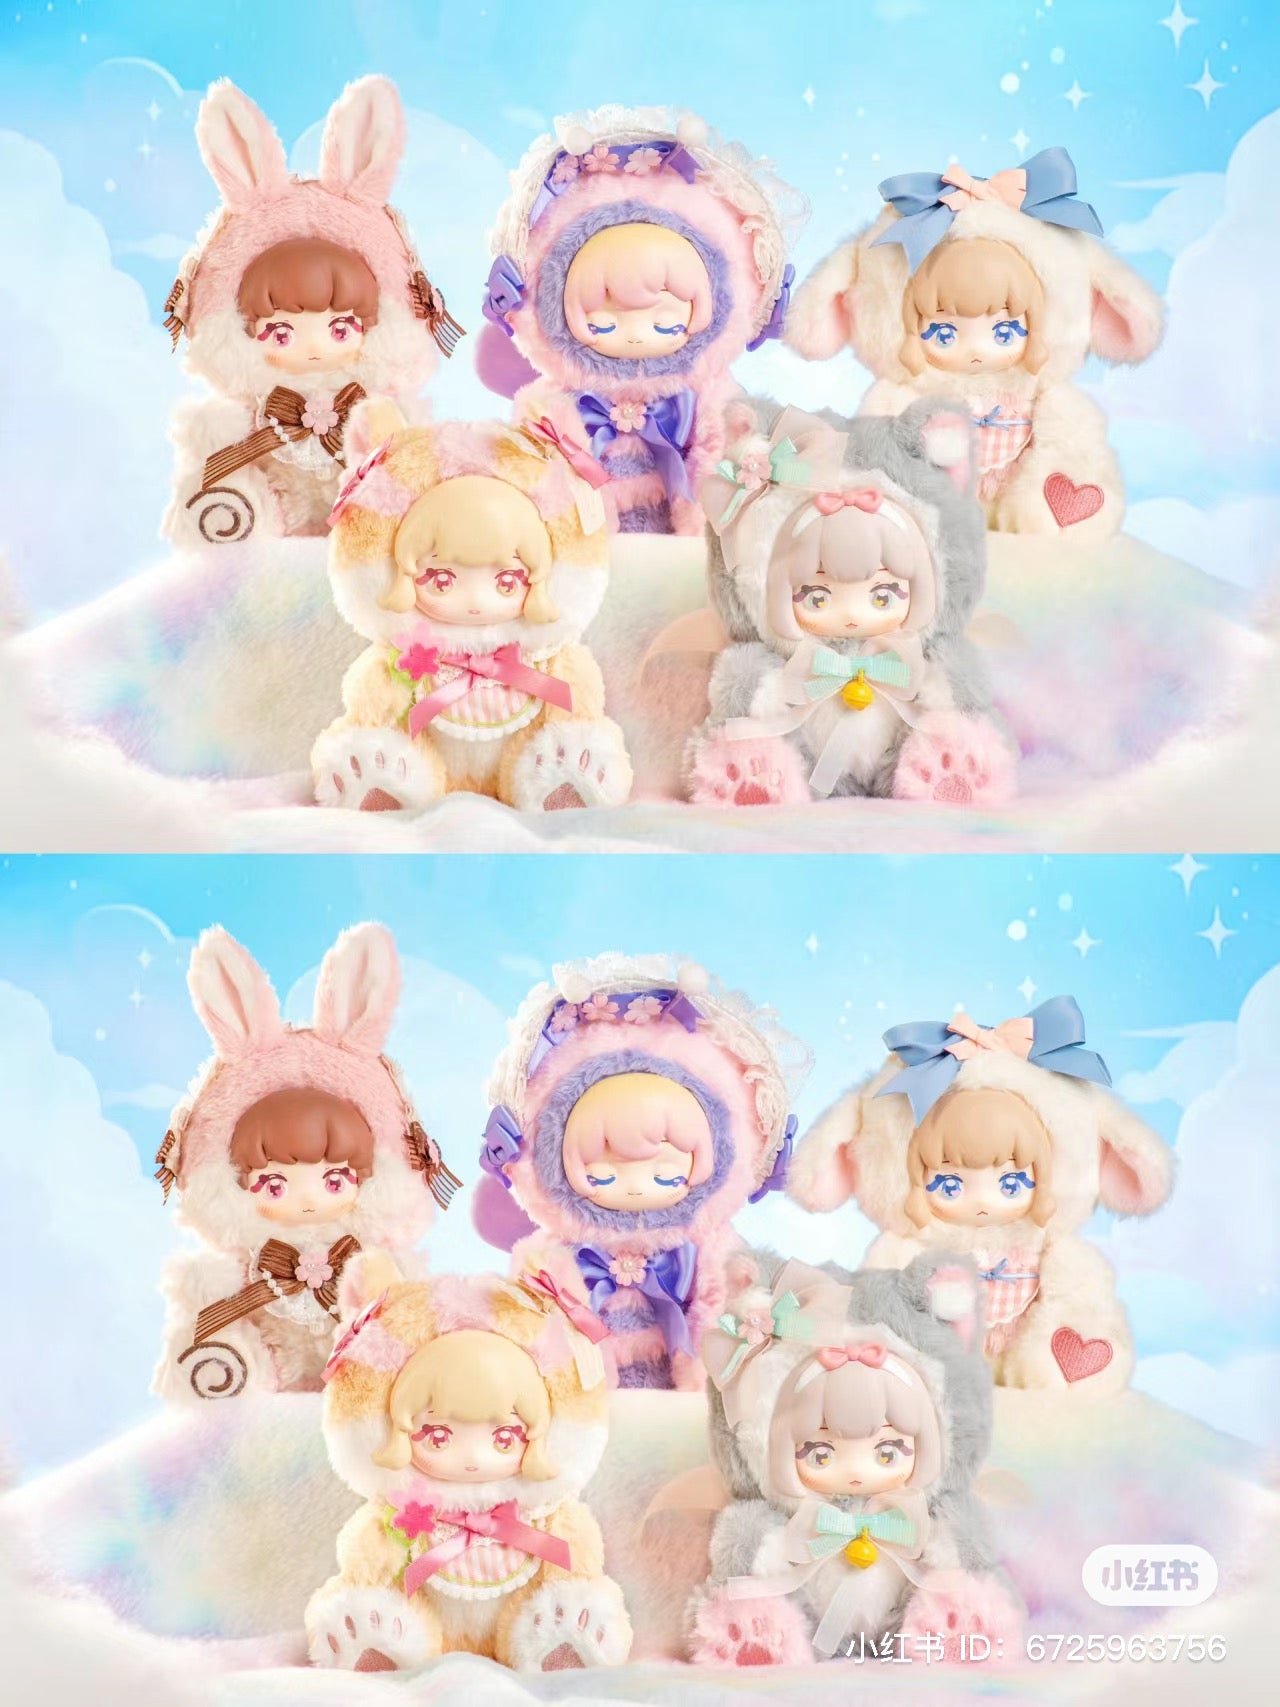 NINIZEE Garden Poetry Collection Plush Blind Box Series - Preorder